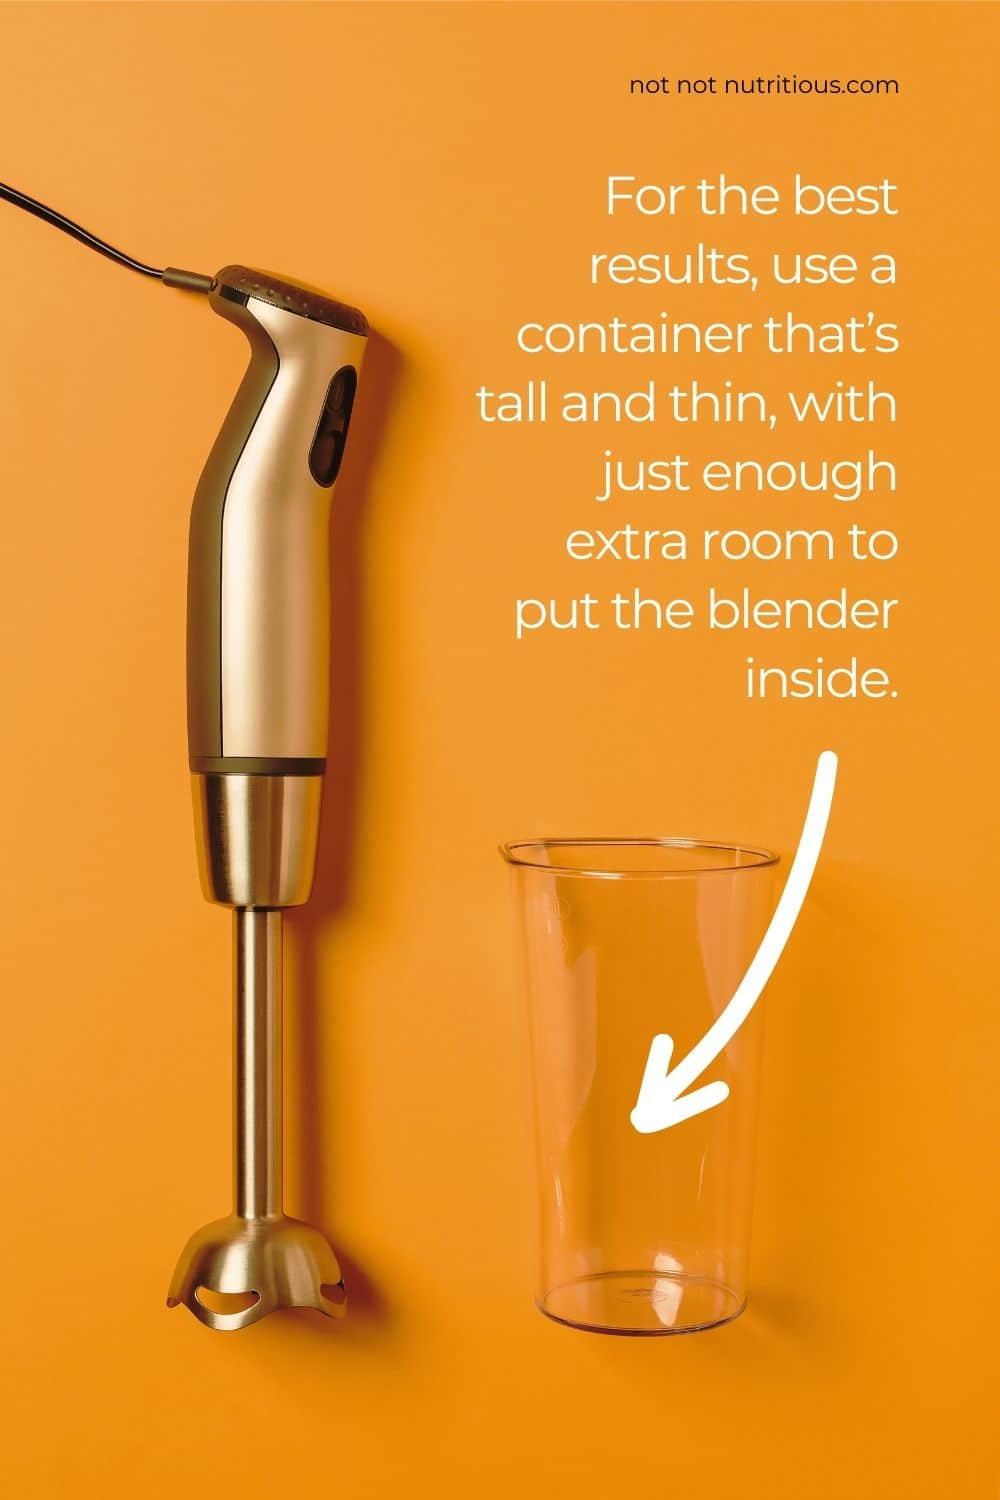 An immersion blender and a blending container. For best results when making mayonnaise with an immersion blender, use a tall, narrow container that is just big enough to put the blender in.